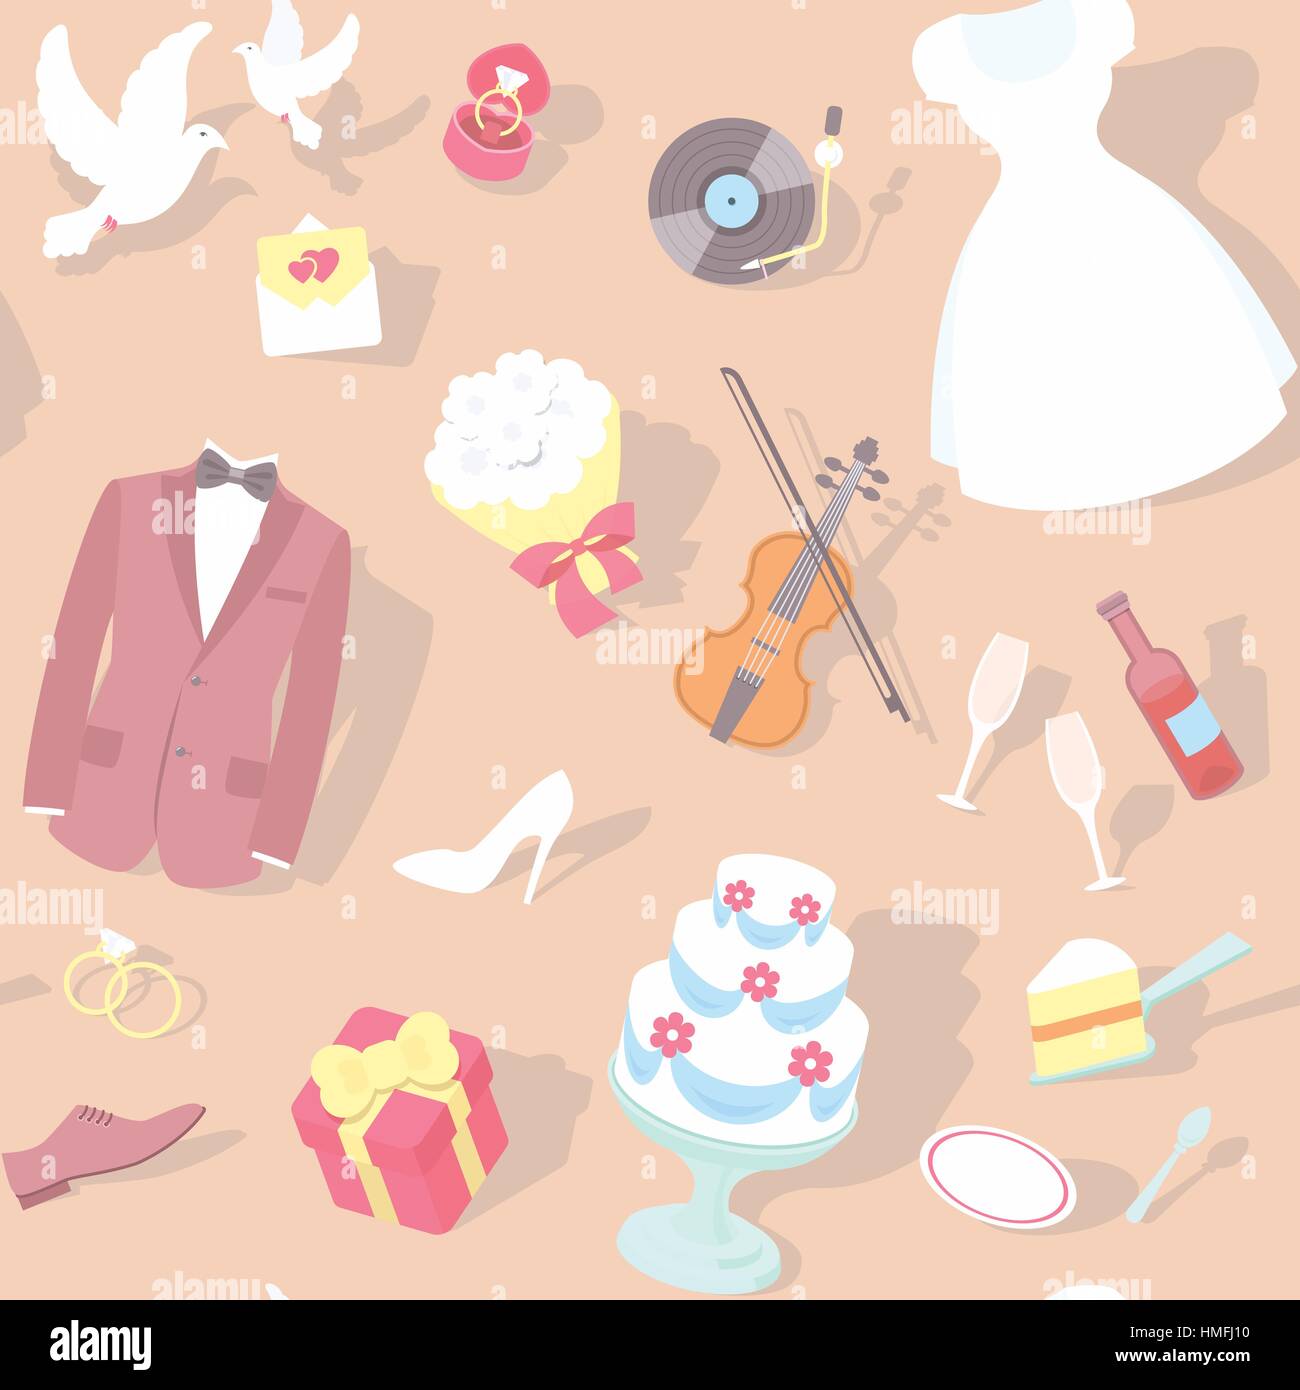 Modern flat seamless pattern with wedding accessories: wedding dress, groom suit, wedding cake, rings, bouquet, pigeons, violin on a plain background  Stock Vector